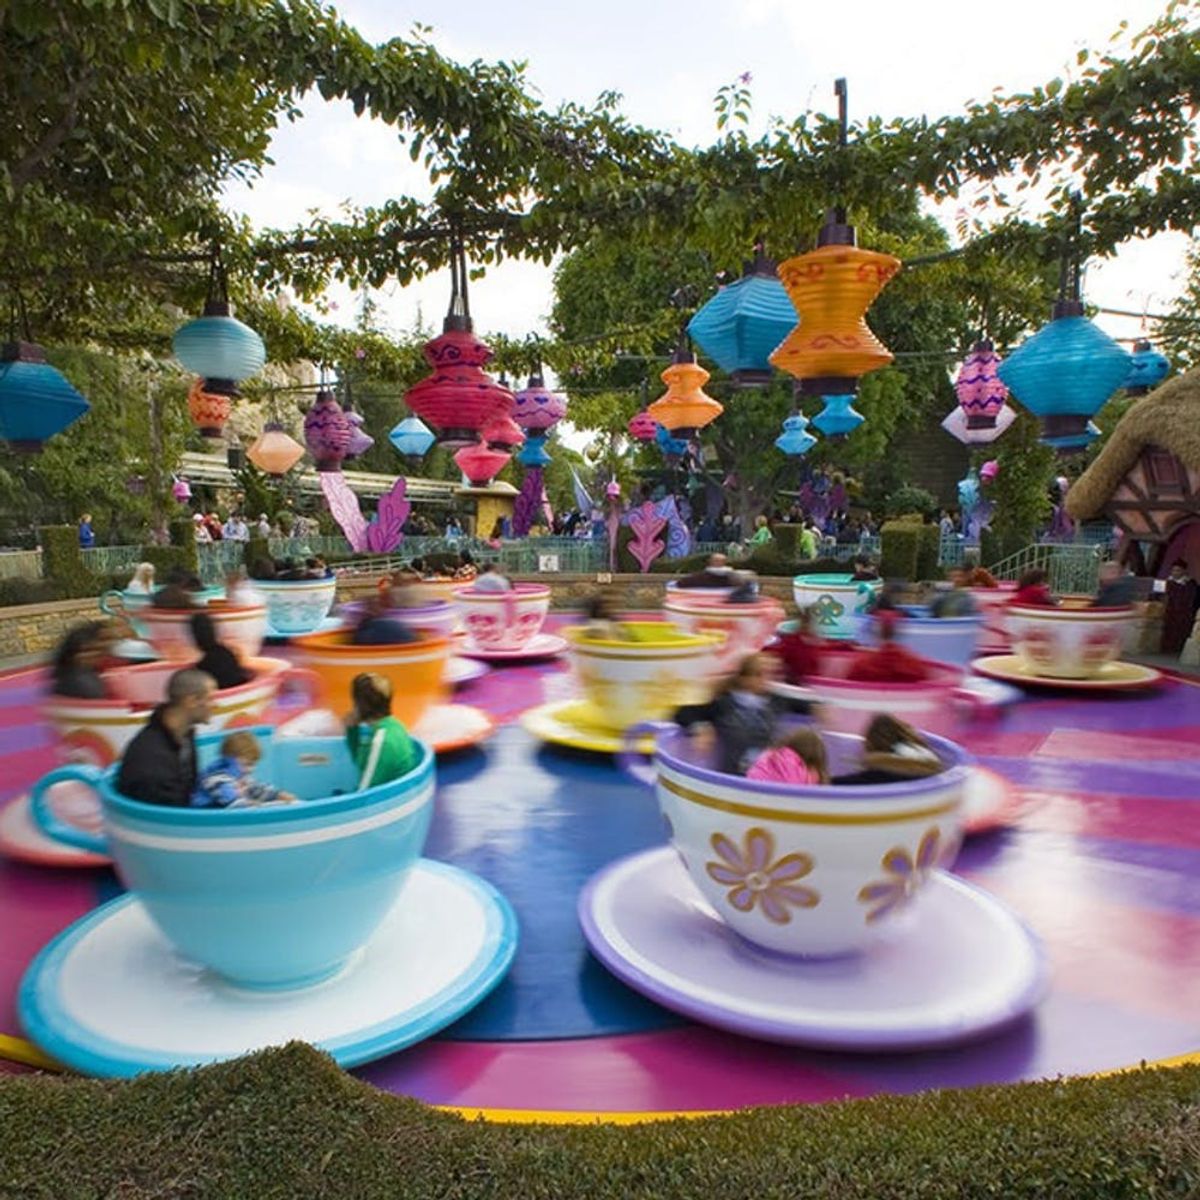 17 Things You Didn’t Know You Could Do at Disneyland